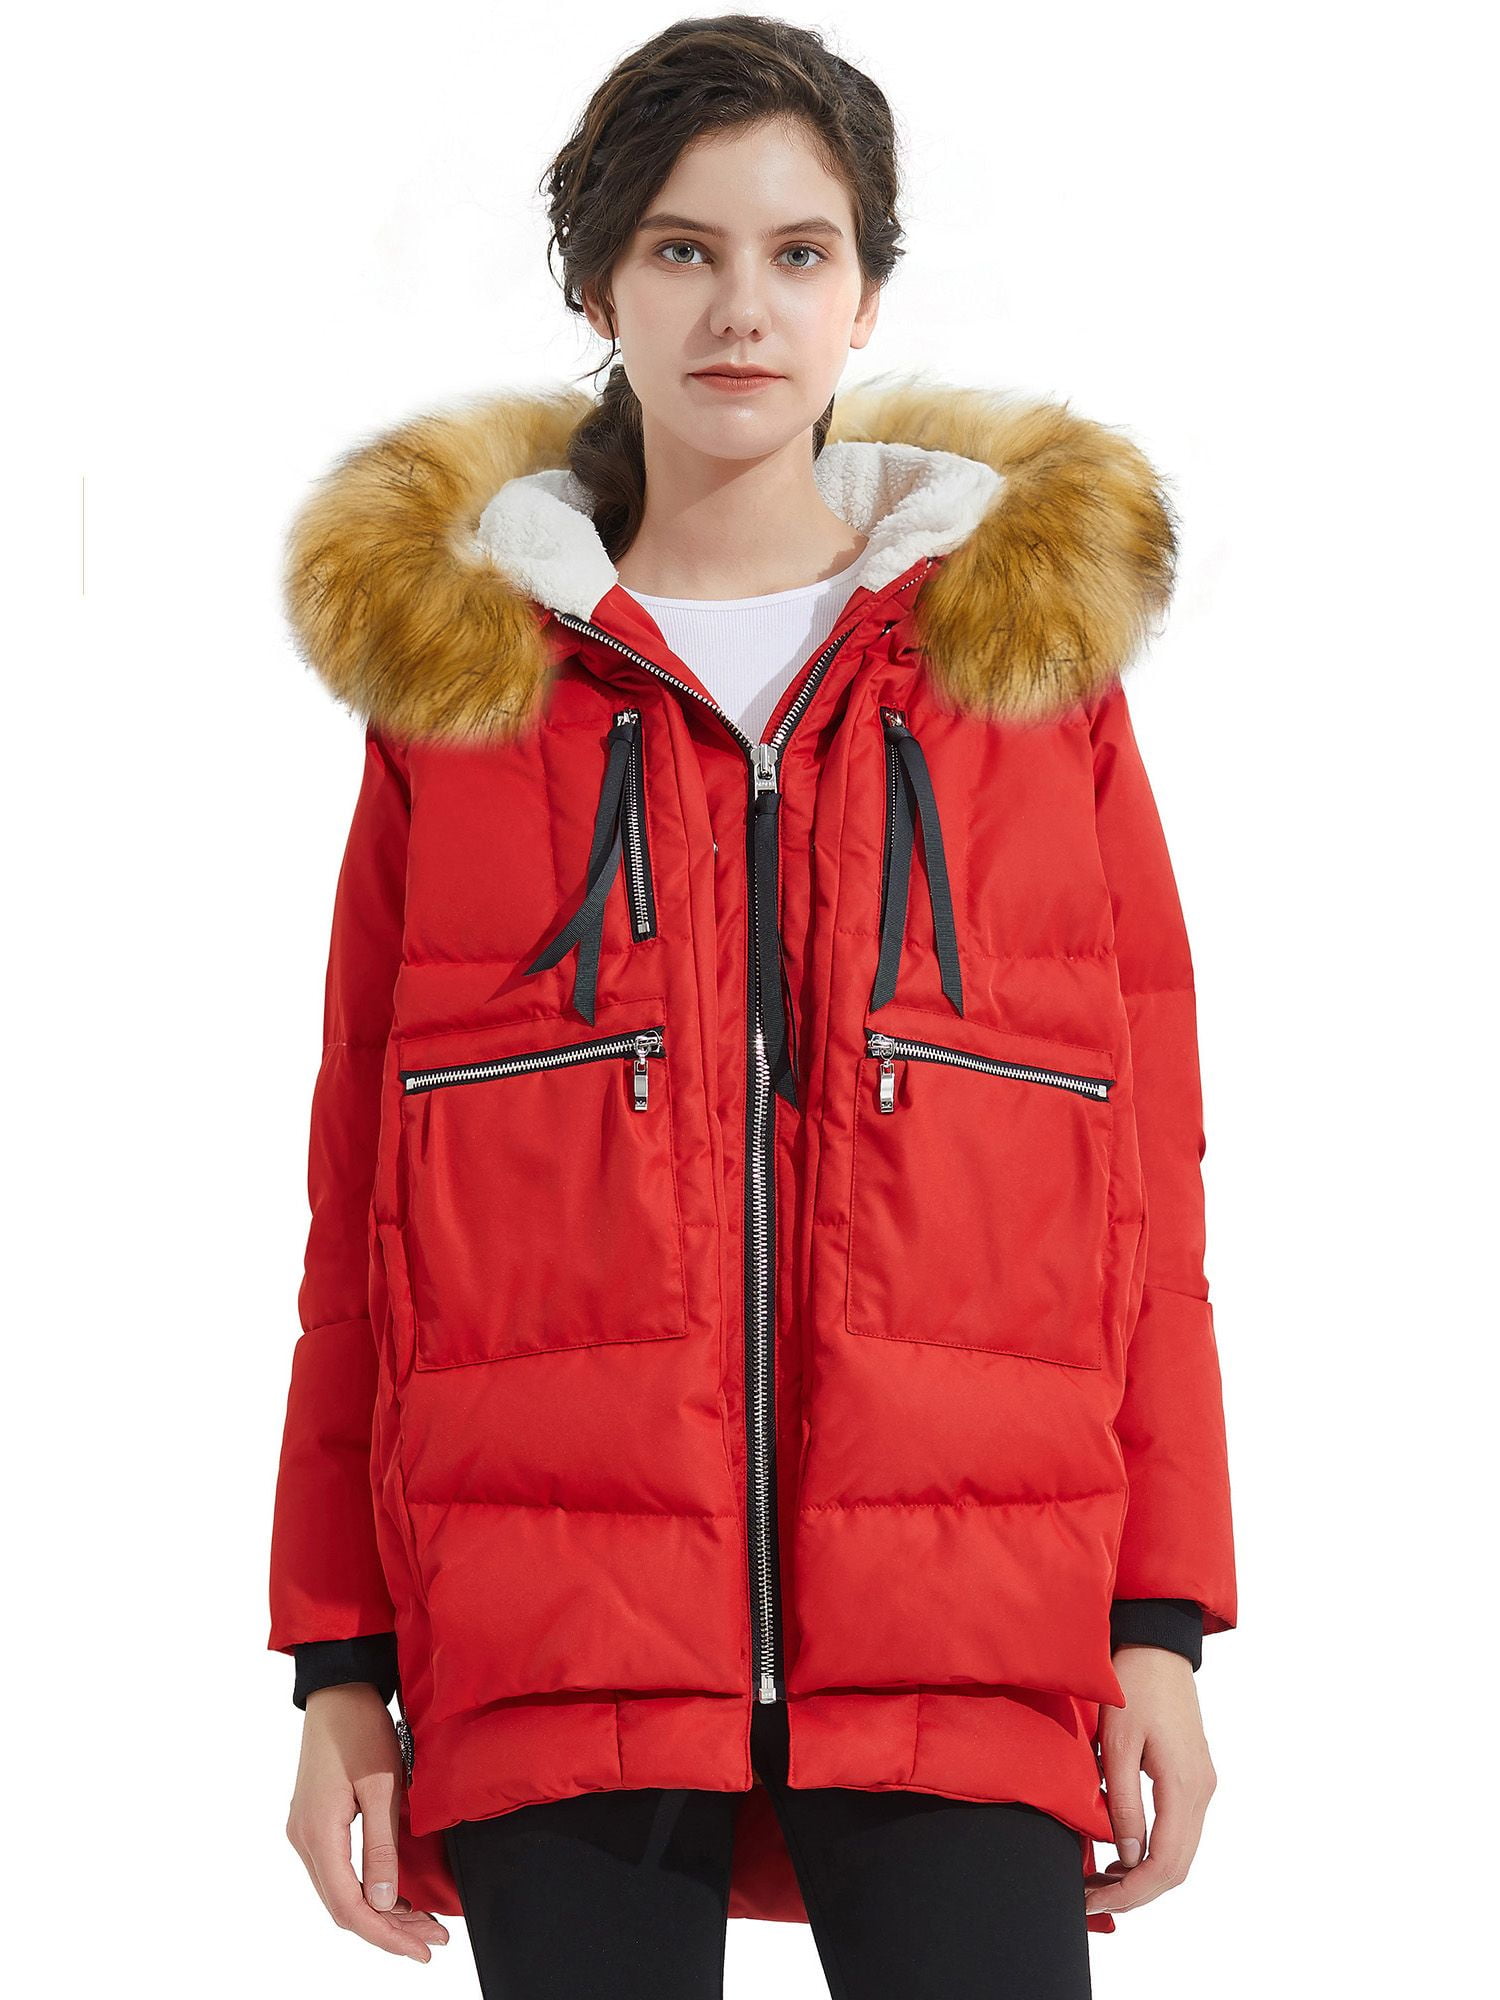 Orolay Women's Warm Down Jacket Hooded Faux Fur Thickened Coat